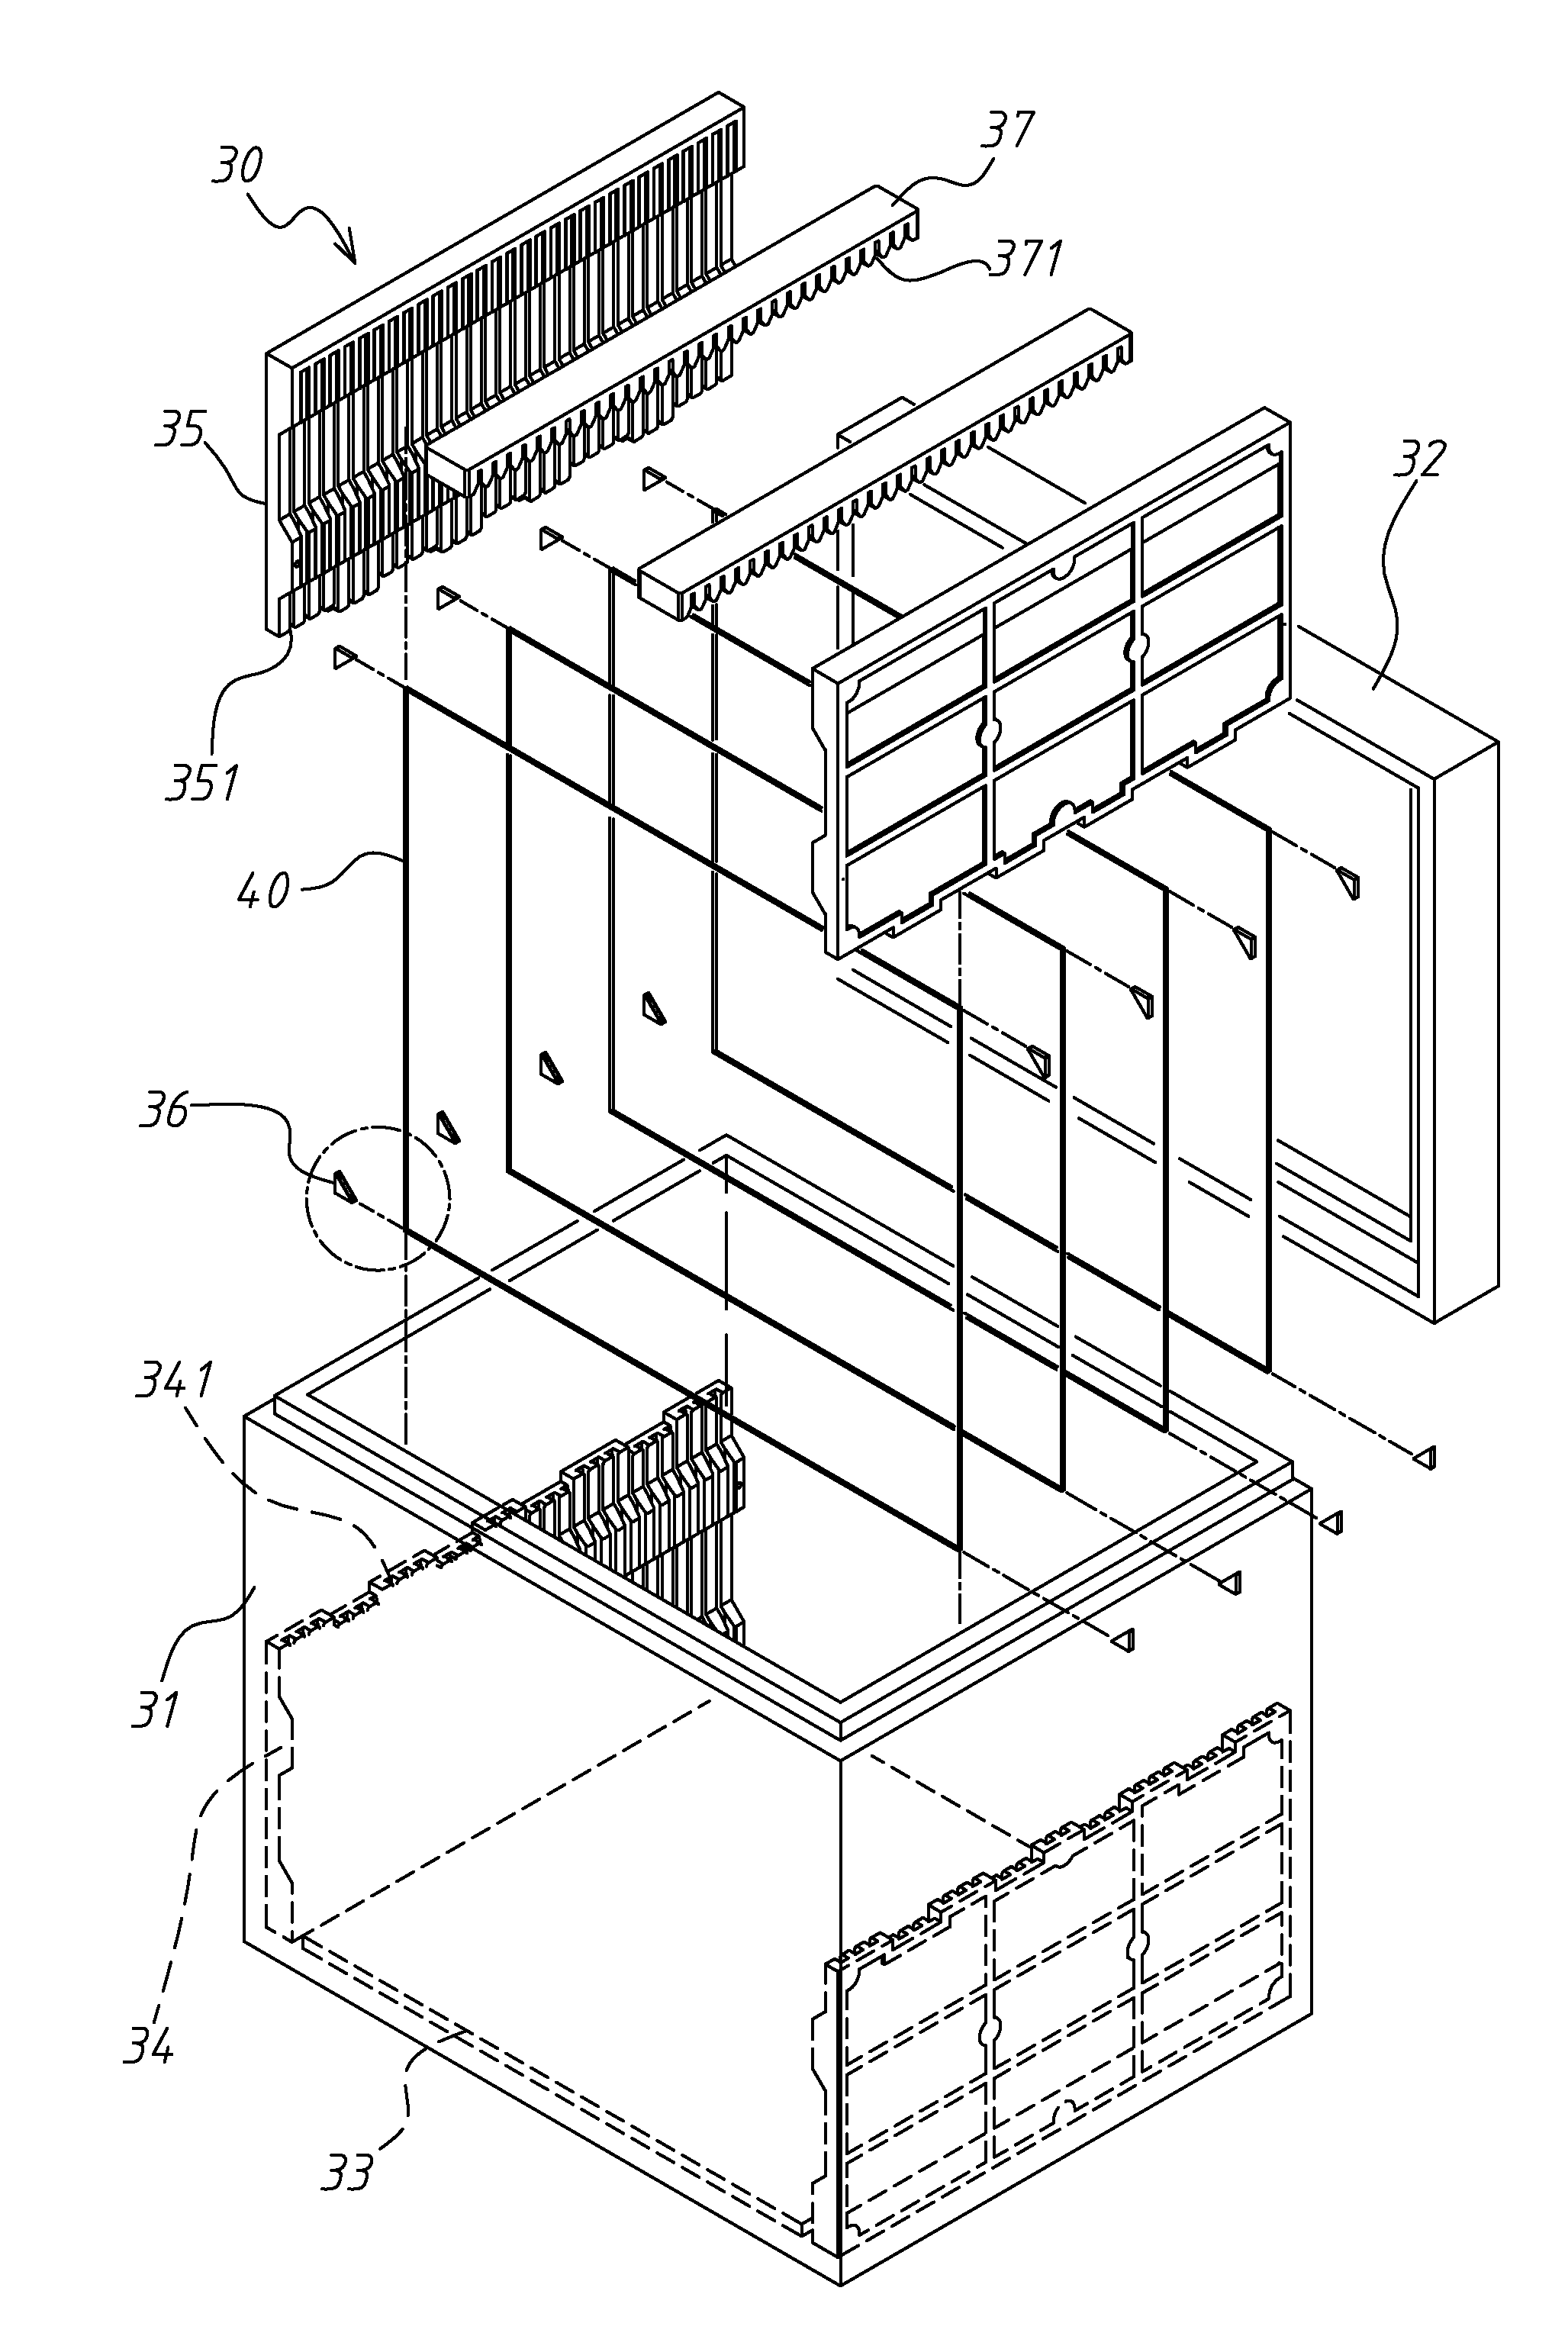 Structure for fragile plate packaging and protection device